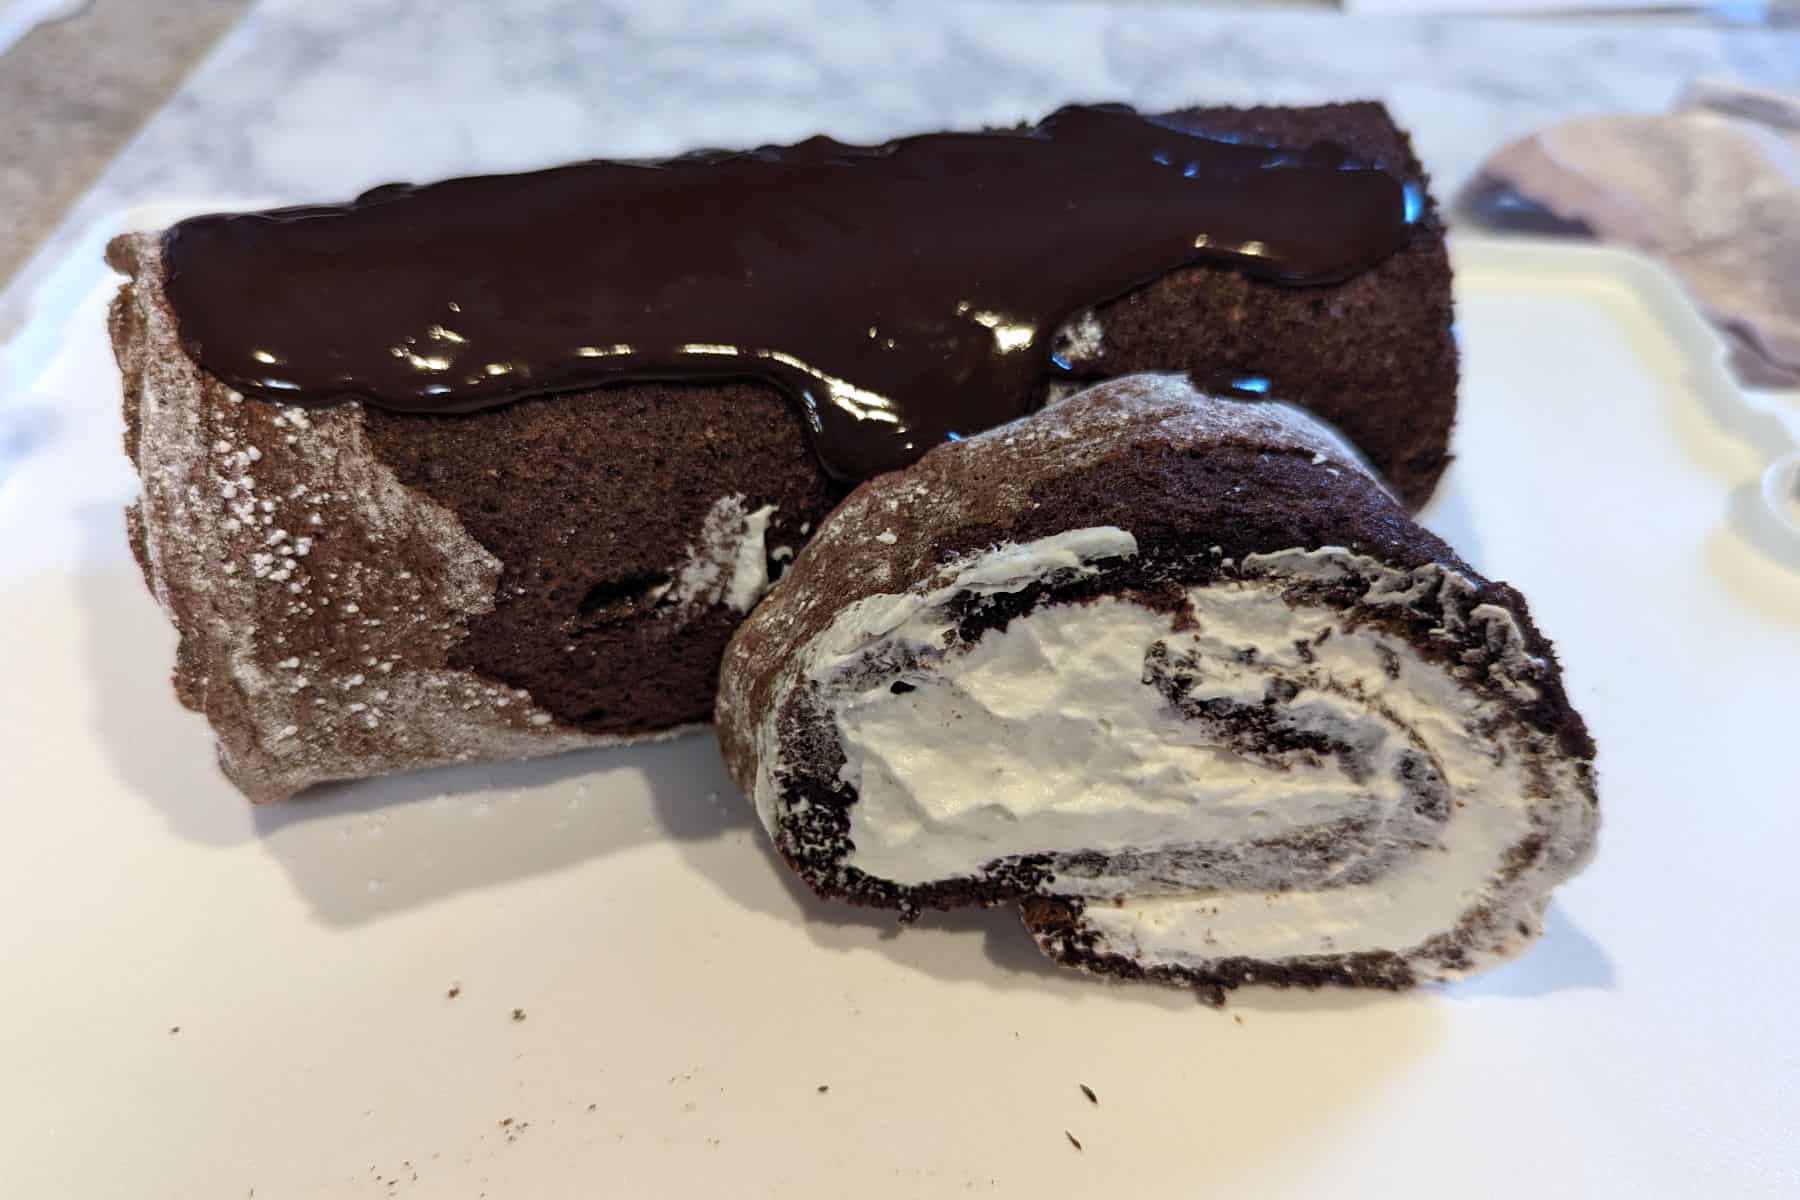 arranged yule log, with chocolate just starting to be drizzled over the top